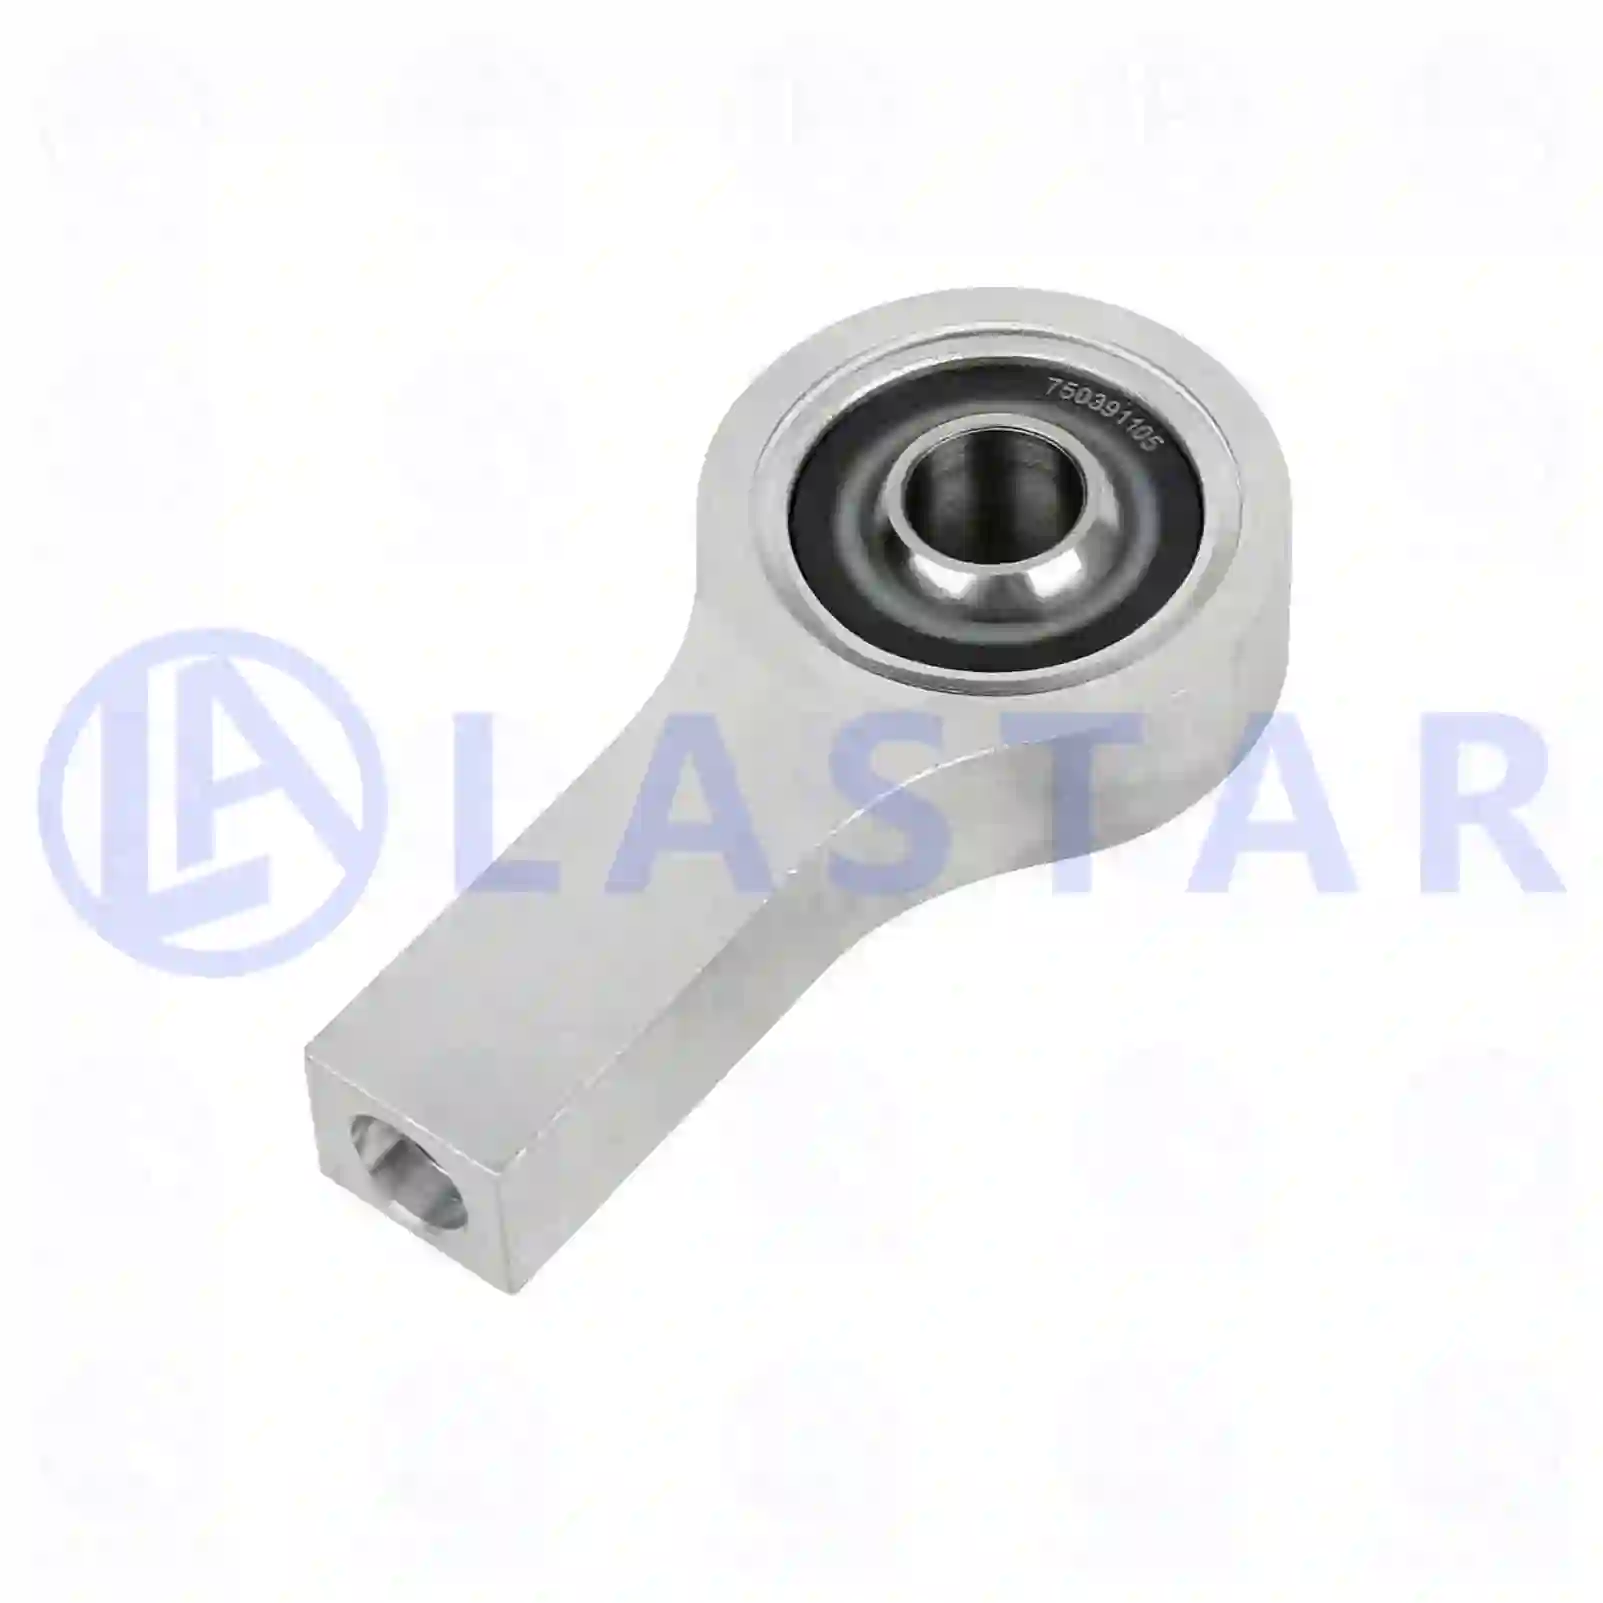 Bearing joint, cabin shock absorber, 77735960, 1743466, , , ||  77735960 Lastar Spare Part | Truck Spare Parts, Auotomotive Spare Parts Bearing joint, cabin shock absorber, 77735960, 1743466, , , ||  77735960 Lastar Spare Part | Truck Spare Parts, Auotomotive Spare Parts